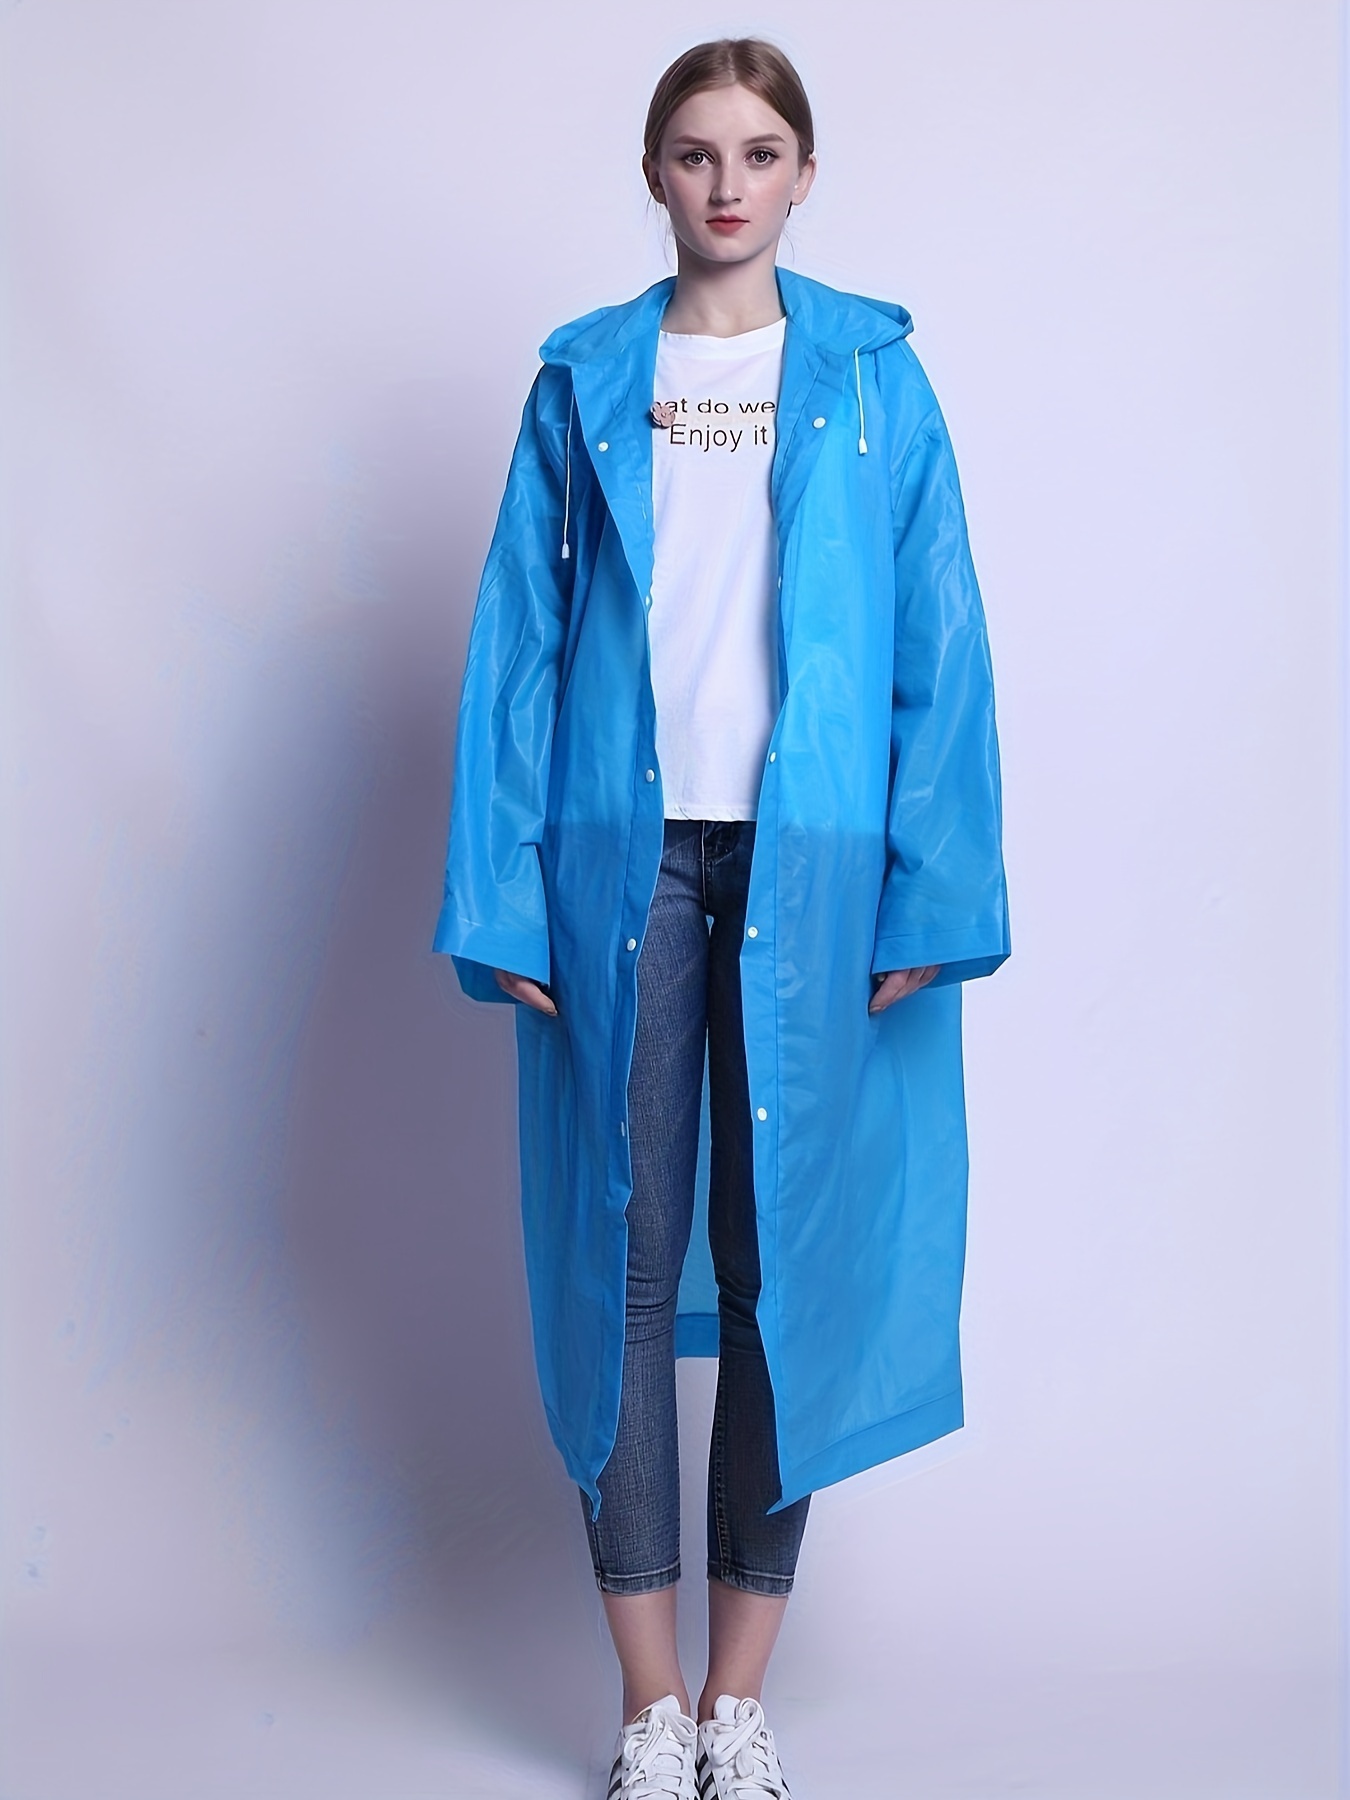 fashionable and lightweight reusable raincoat travel poncho for women thickened eva material provides ultimate protection from rain and wind ideal for outdoor activities details 1